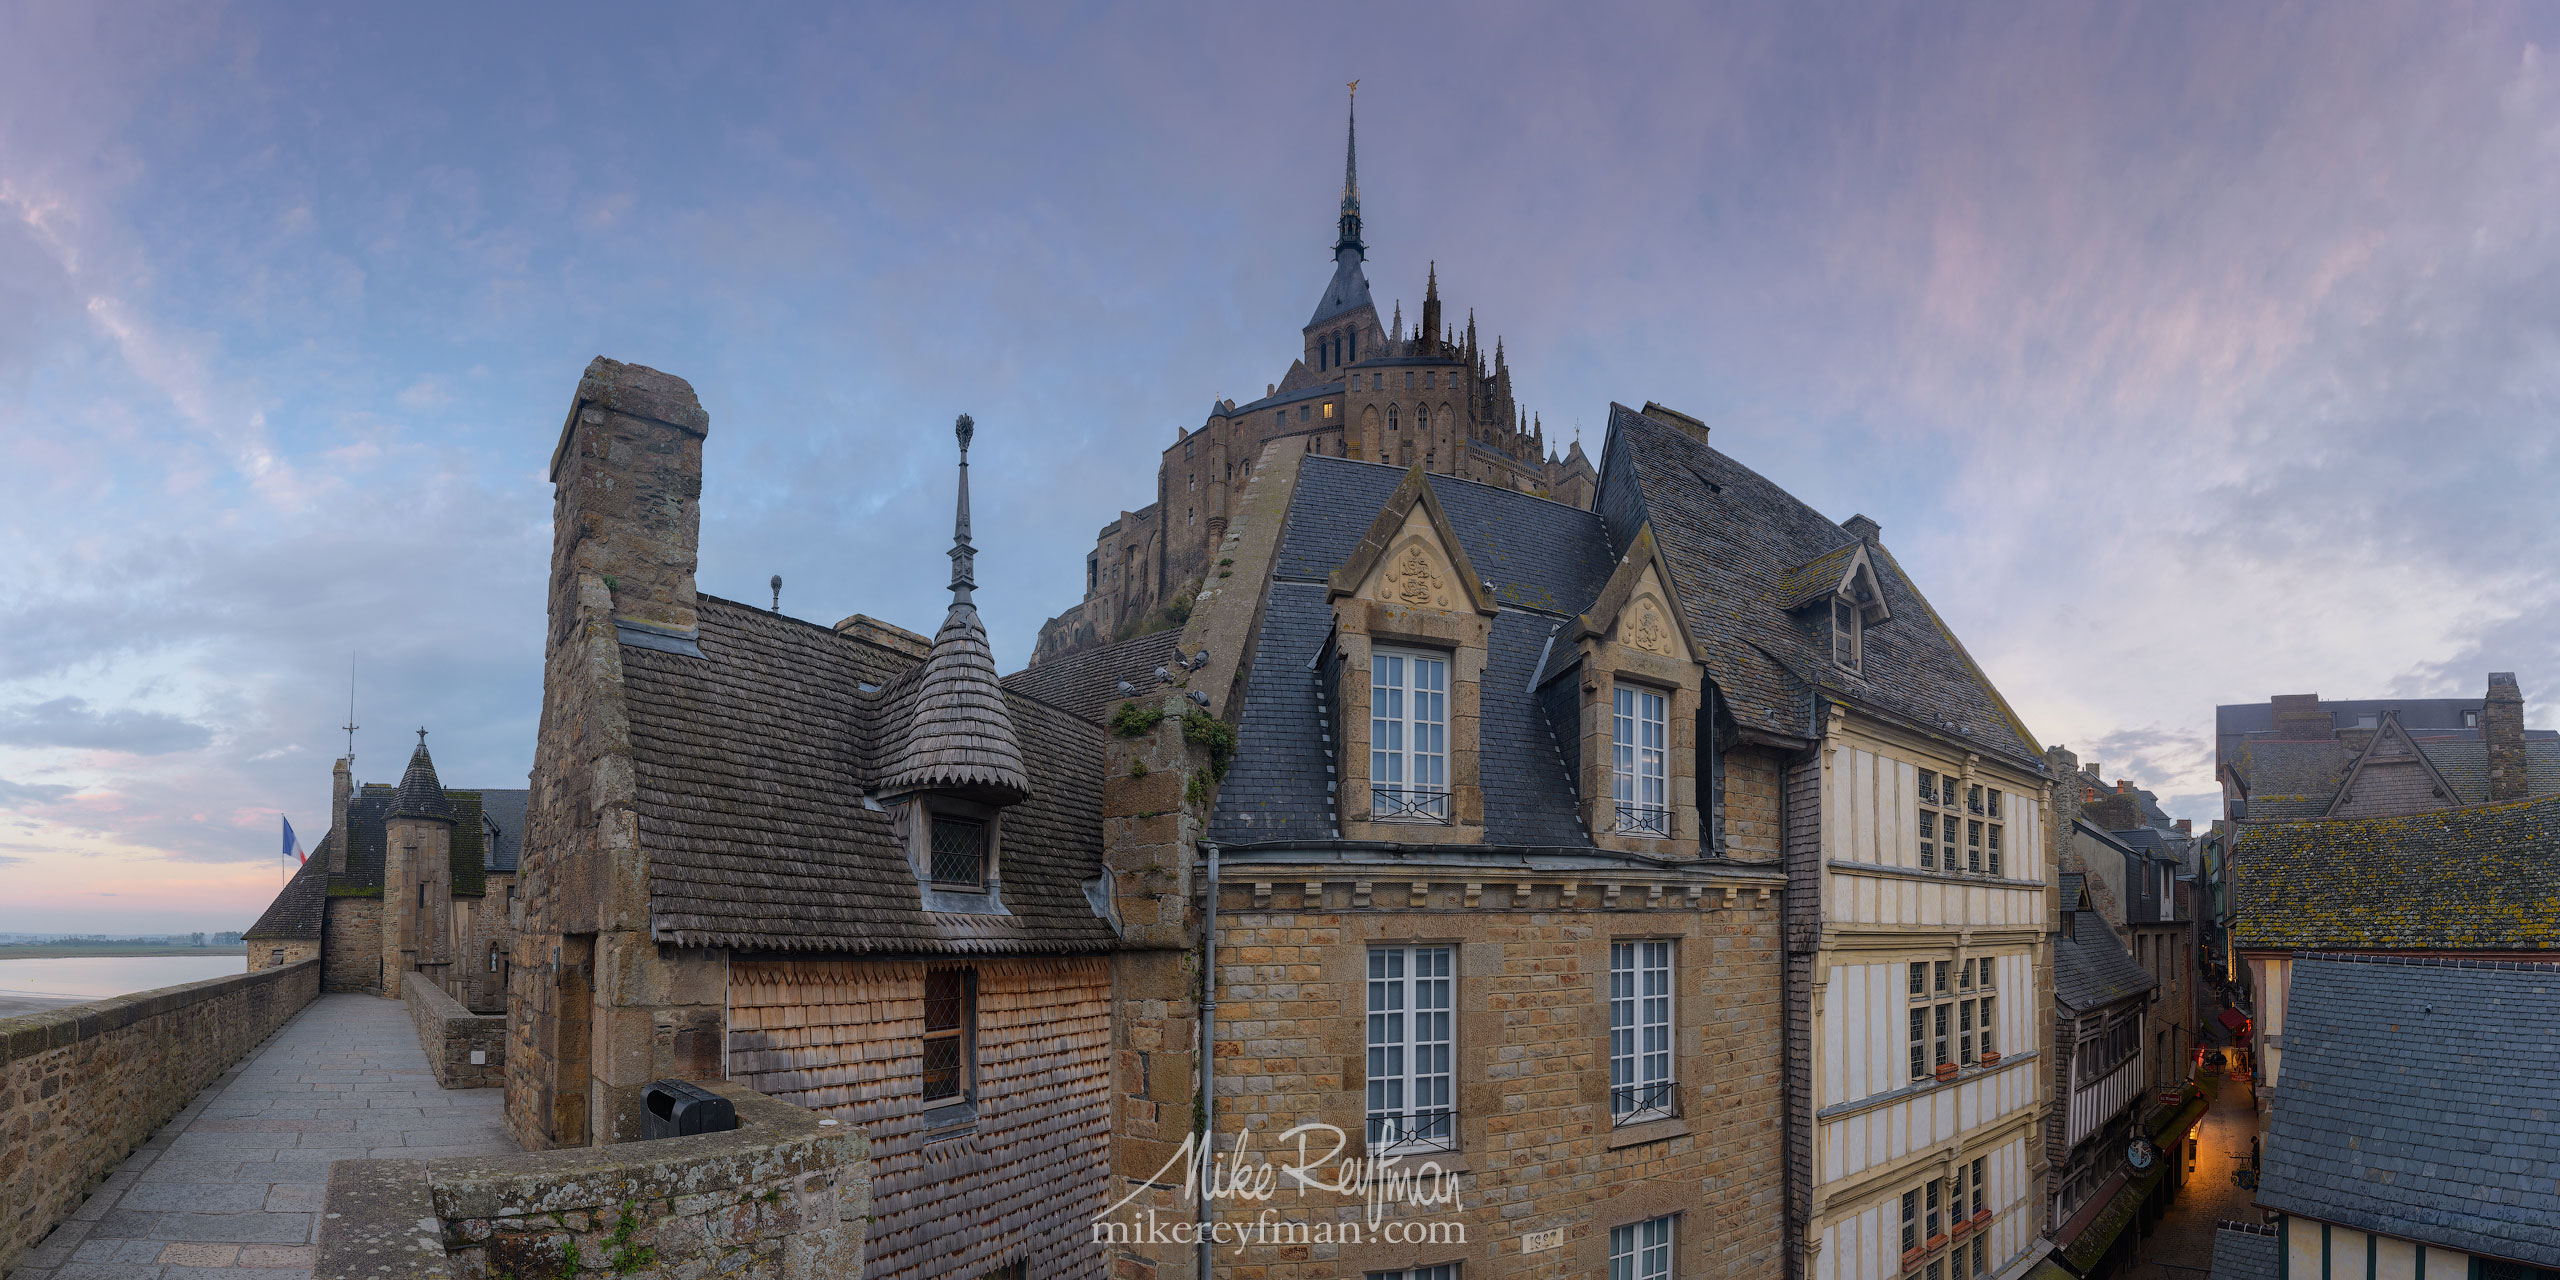 Le Mont-Saint-Michel Island and Benedictine Abbey. Normandy, France SM_MR50A1132-Pano_2x1 - Le Mont Saint Michel Island and Benedictine Abbey, Normandy, France - Mike Reyfman Photography